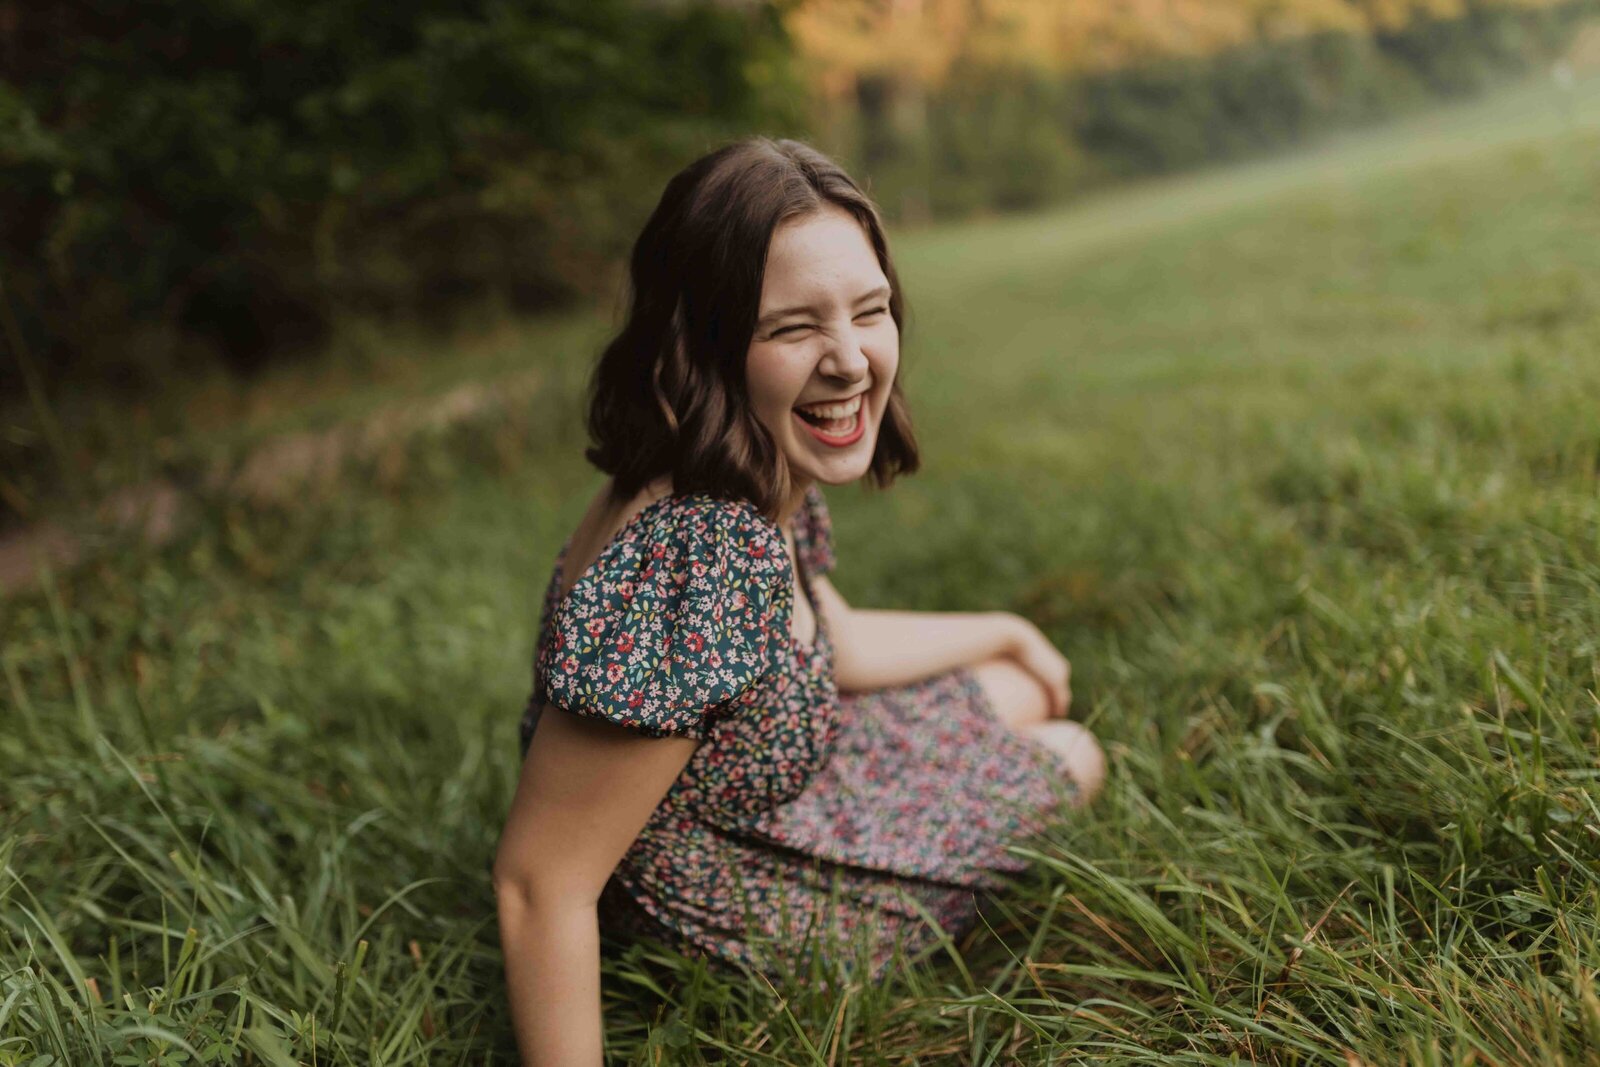 Senior girl is wearing a sun dress, sitting in grass. Back is to the camera and she looks back laughing with eyes closed.